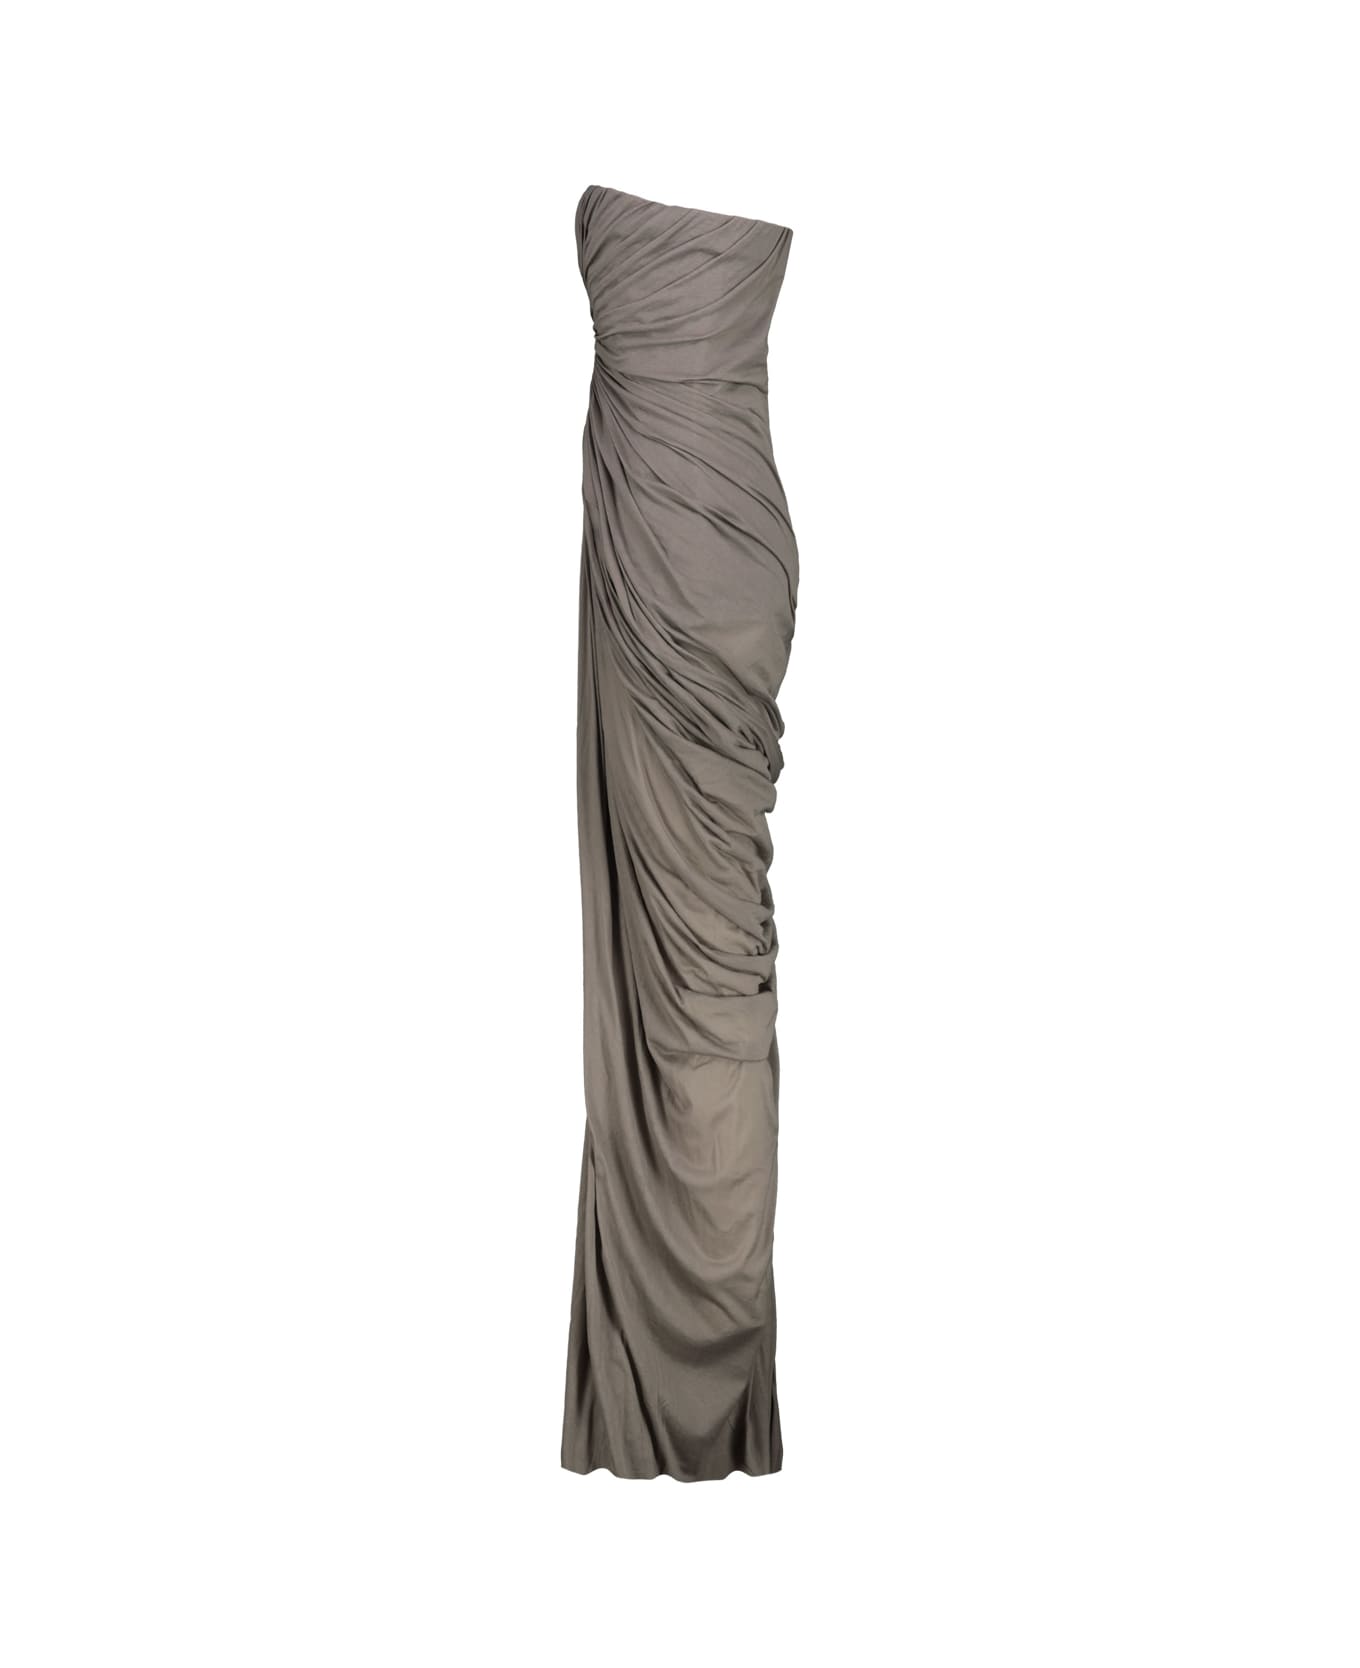 Rick Owens Radiance Bustier Gown - Dust